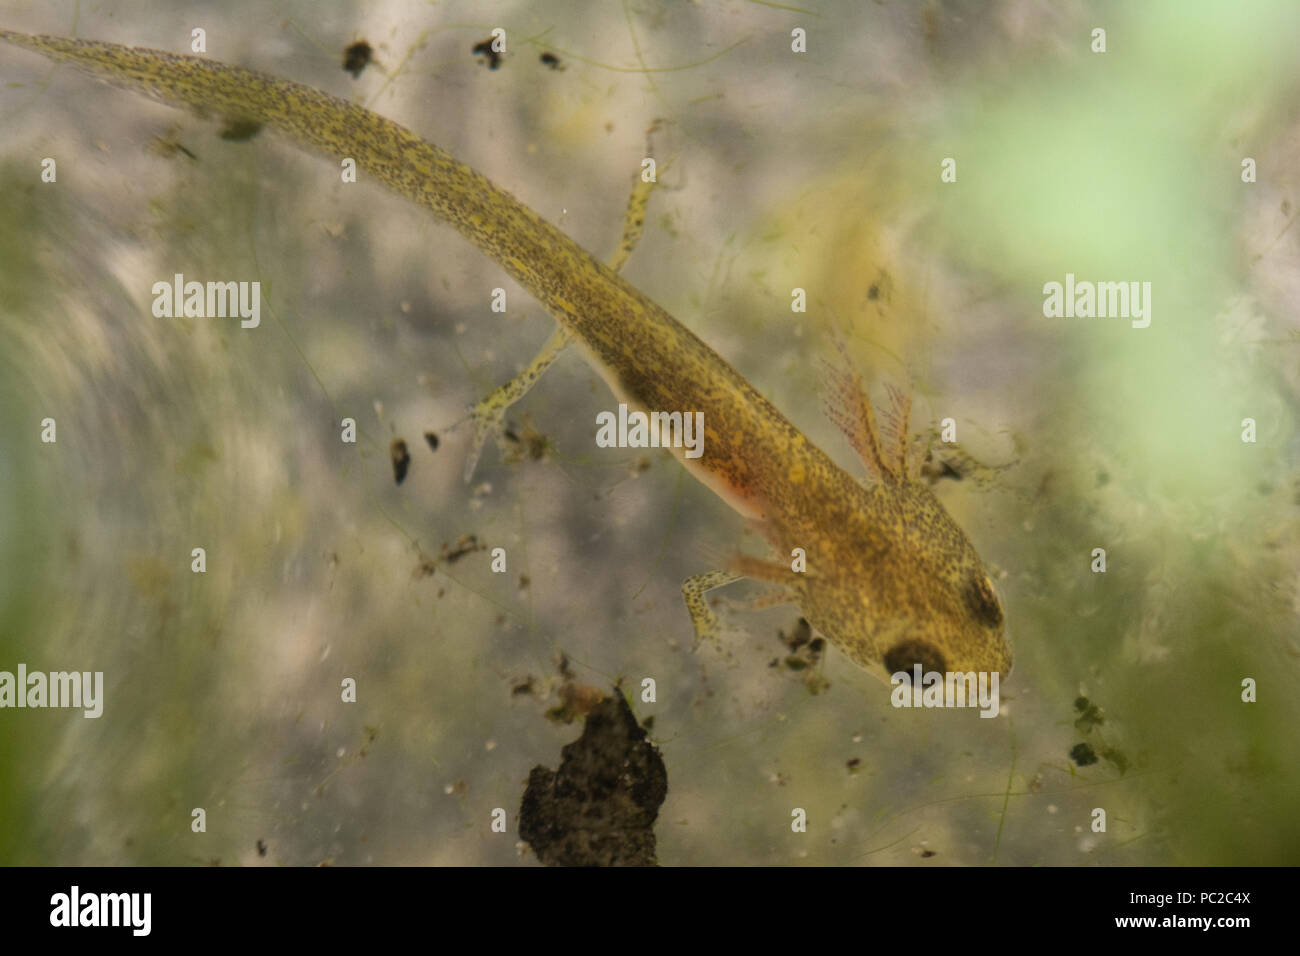 Young smooth newt (common newt, Lissotriton vulgaris) in aquatic phase, swimming in a garden pond during summer Stock Photo